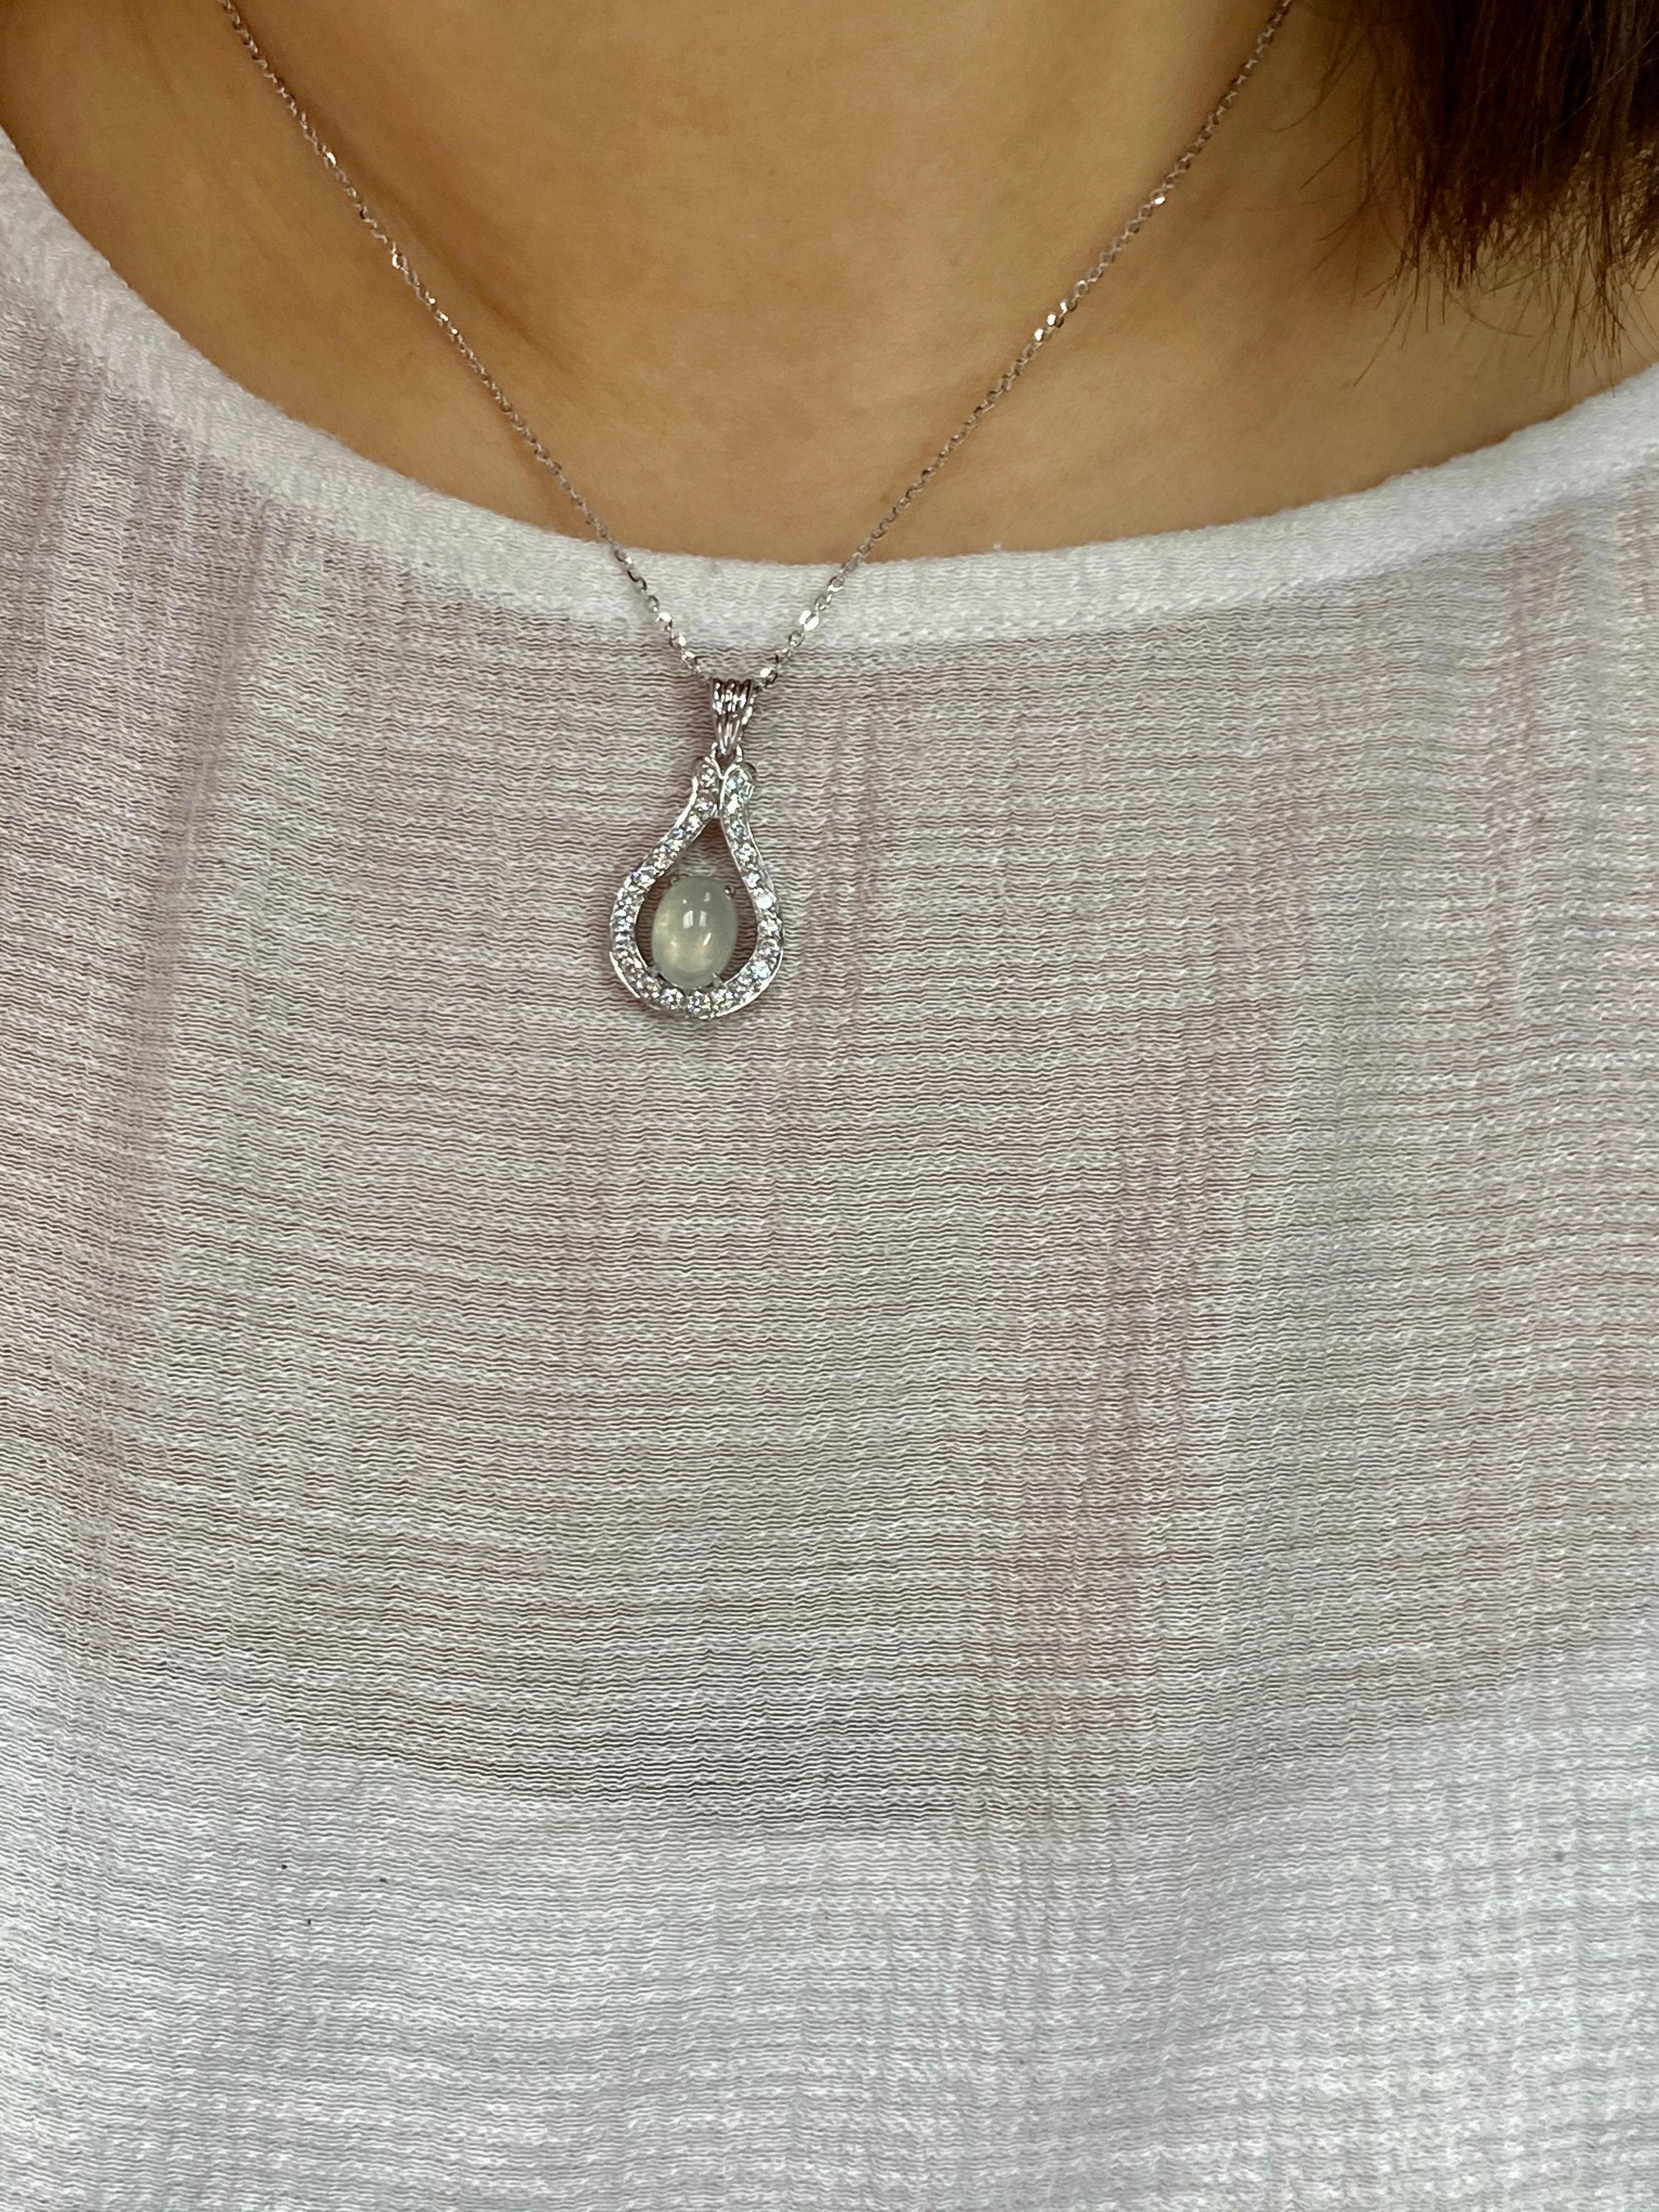 Here is a natural icy Jade and diamond pendant. The jade is certified. The lucky horseshoe pendant is set in 18k white gold and diamonds. There are 0.61 Cts of diamonds set in this drop pendant. The untreated / unenhanced natural jade is translucent